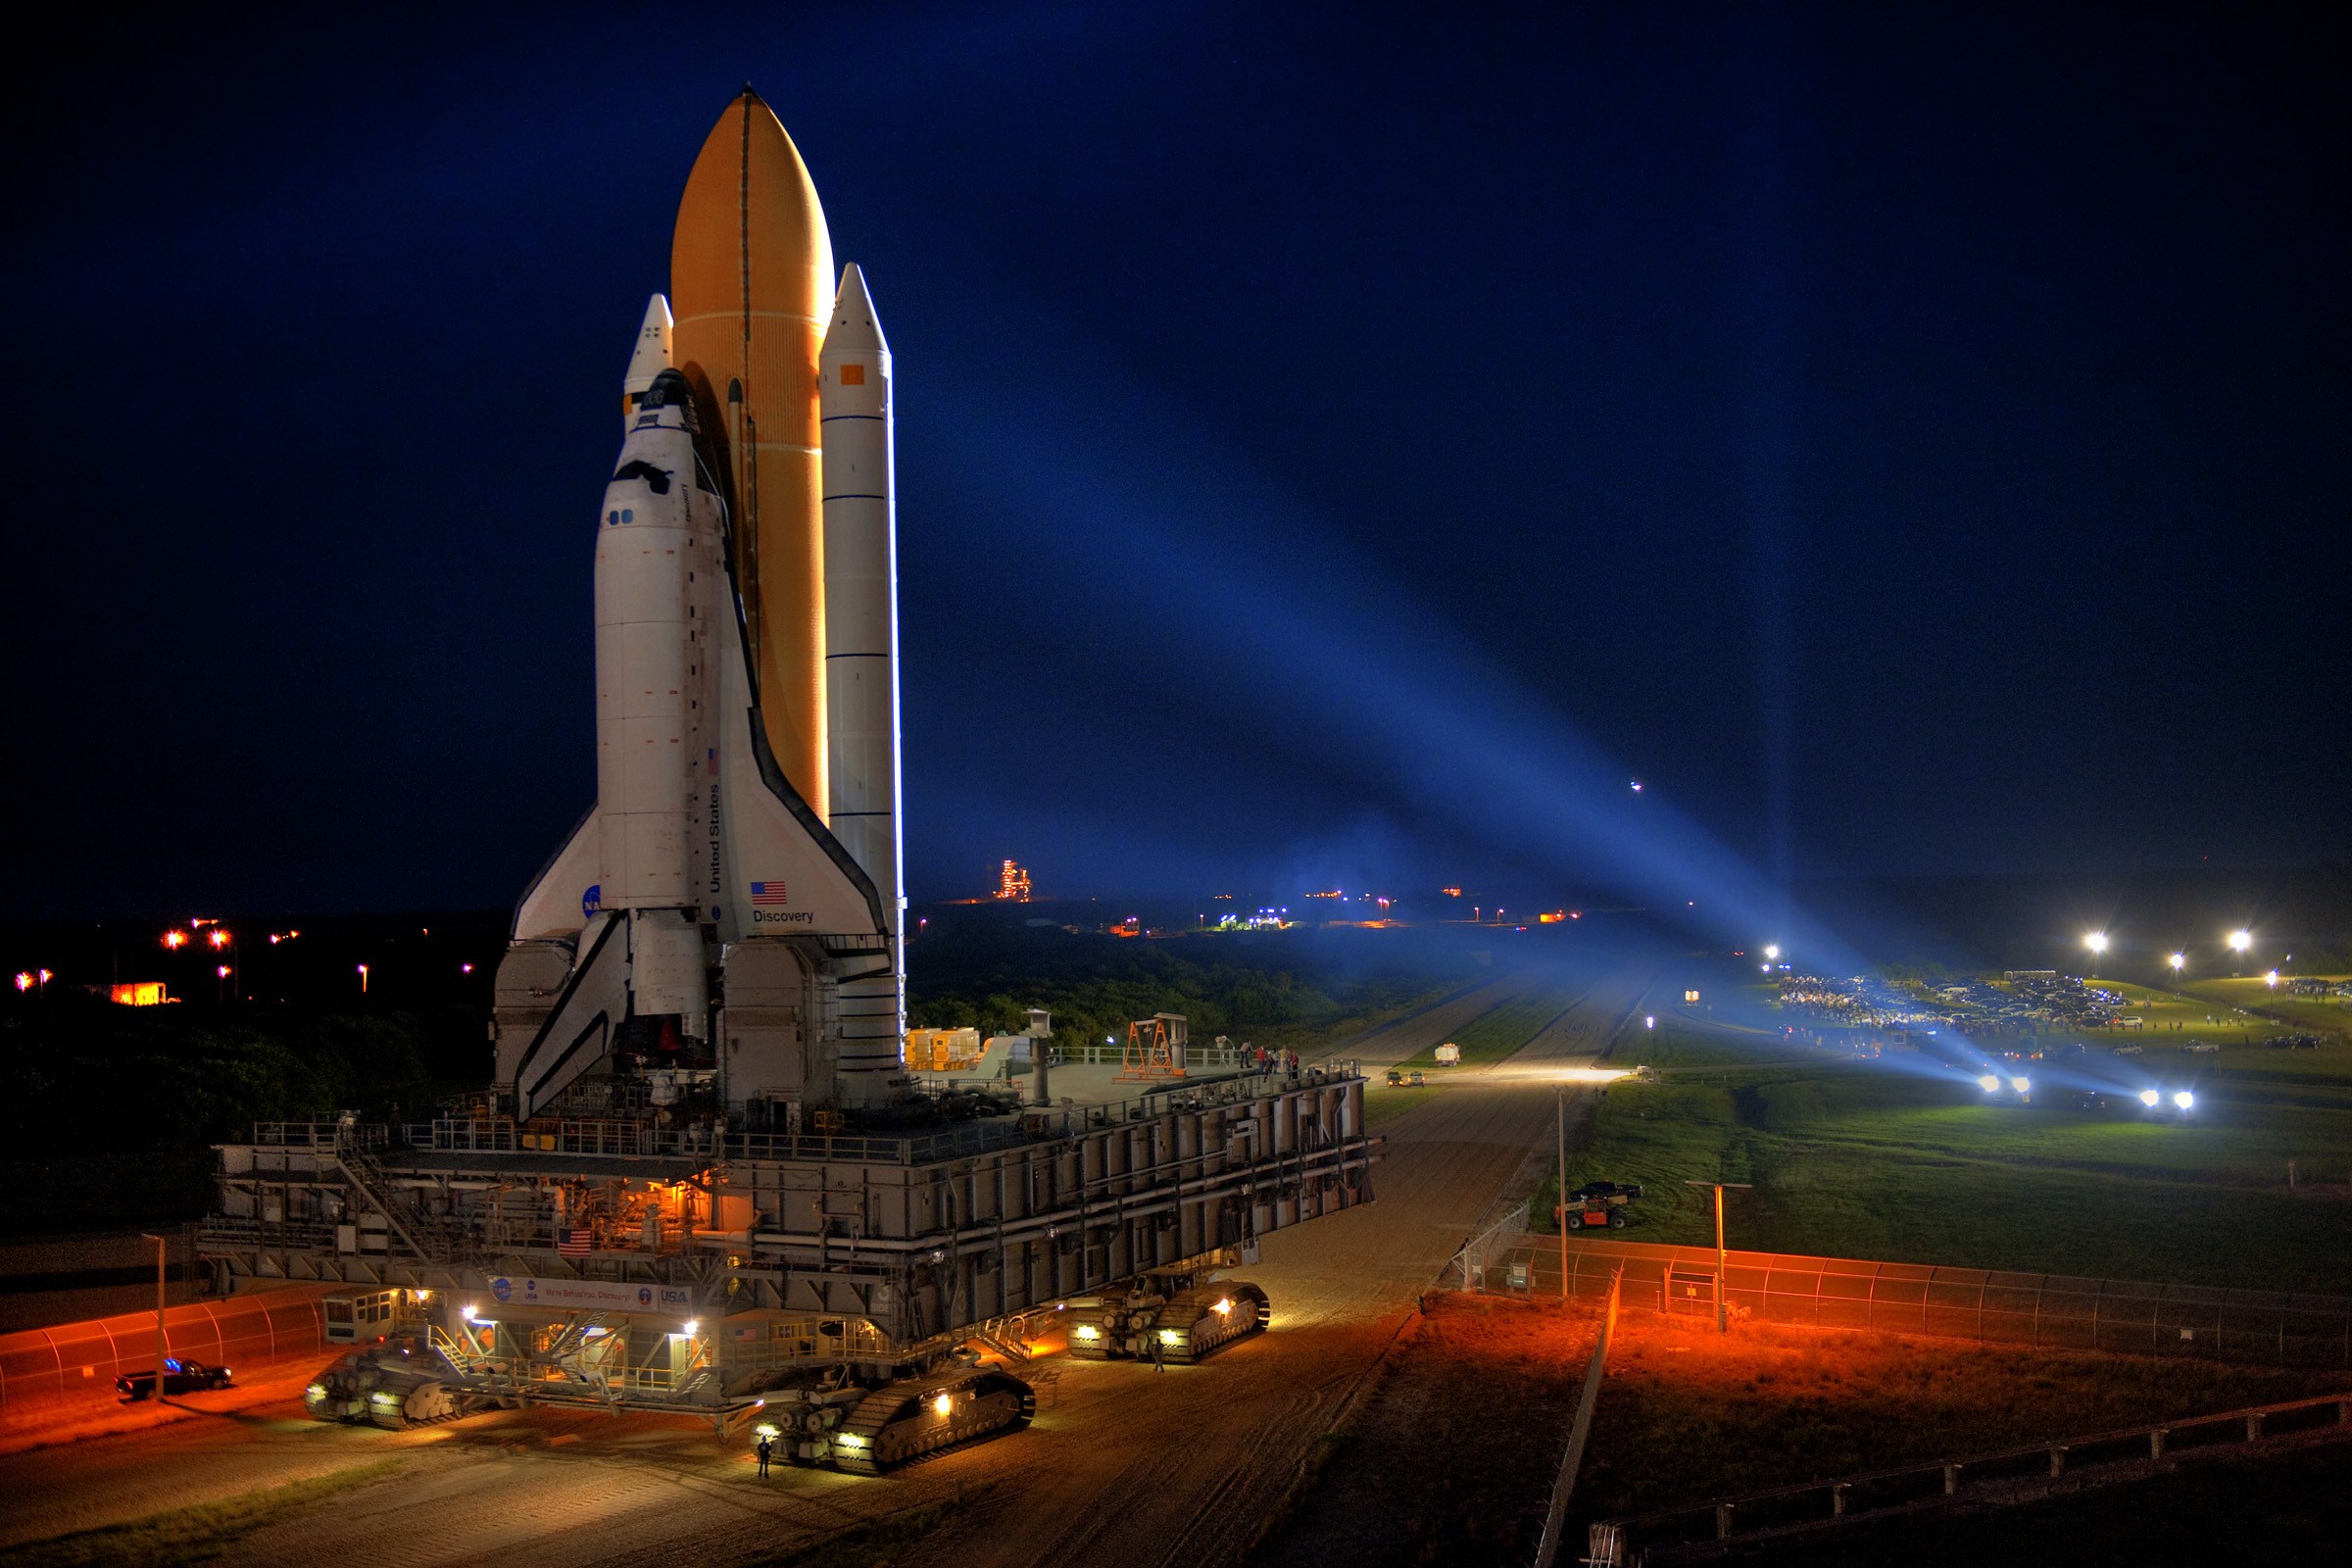 space shuttles, nasa, vehicles, space shuttle discovery, launching pad, shuttle, space shuttle